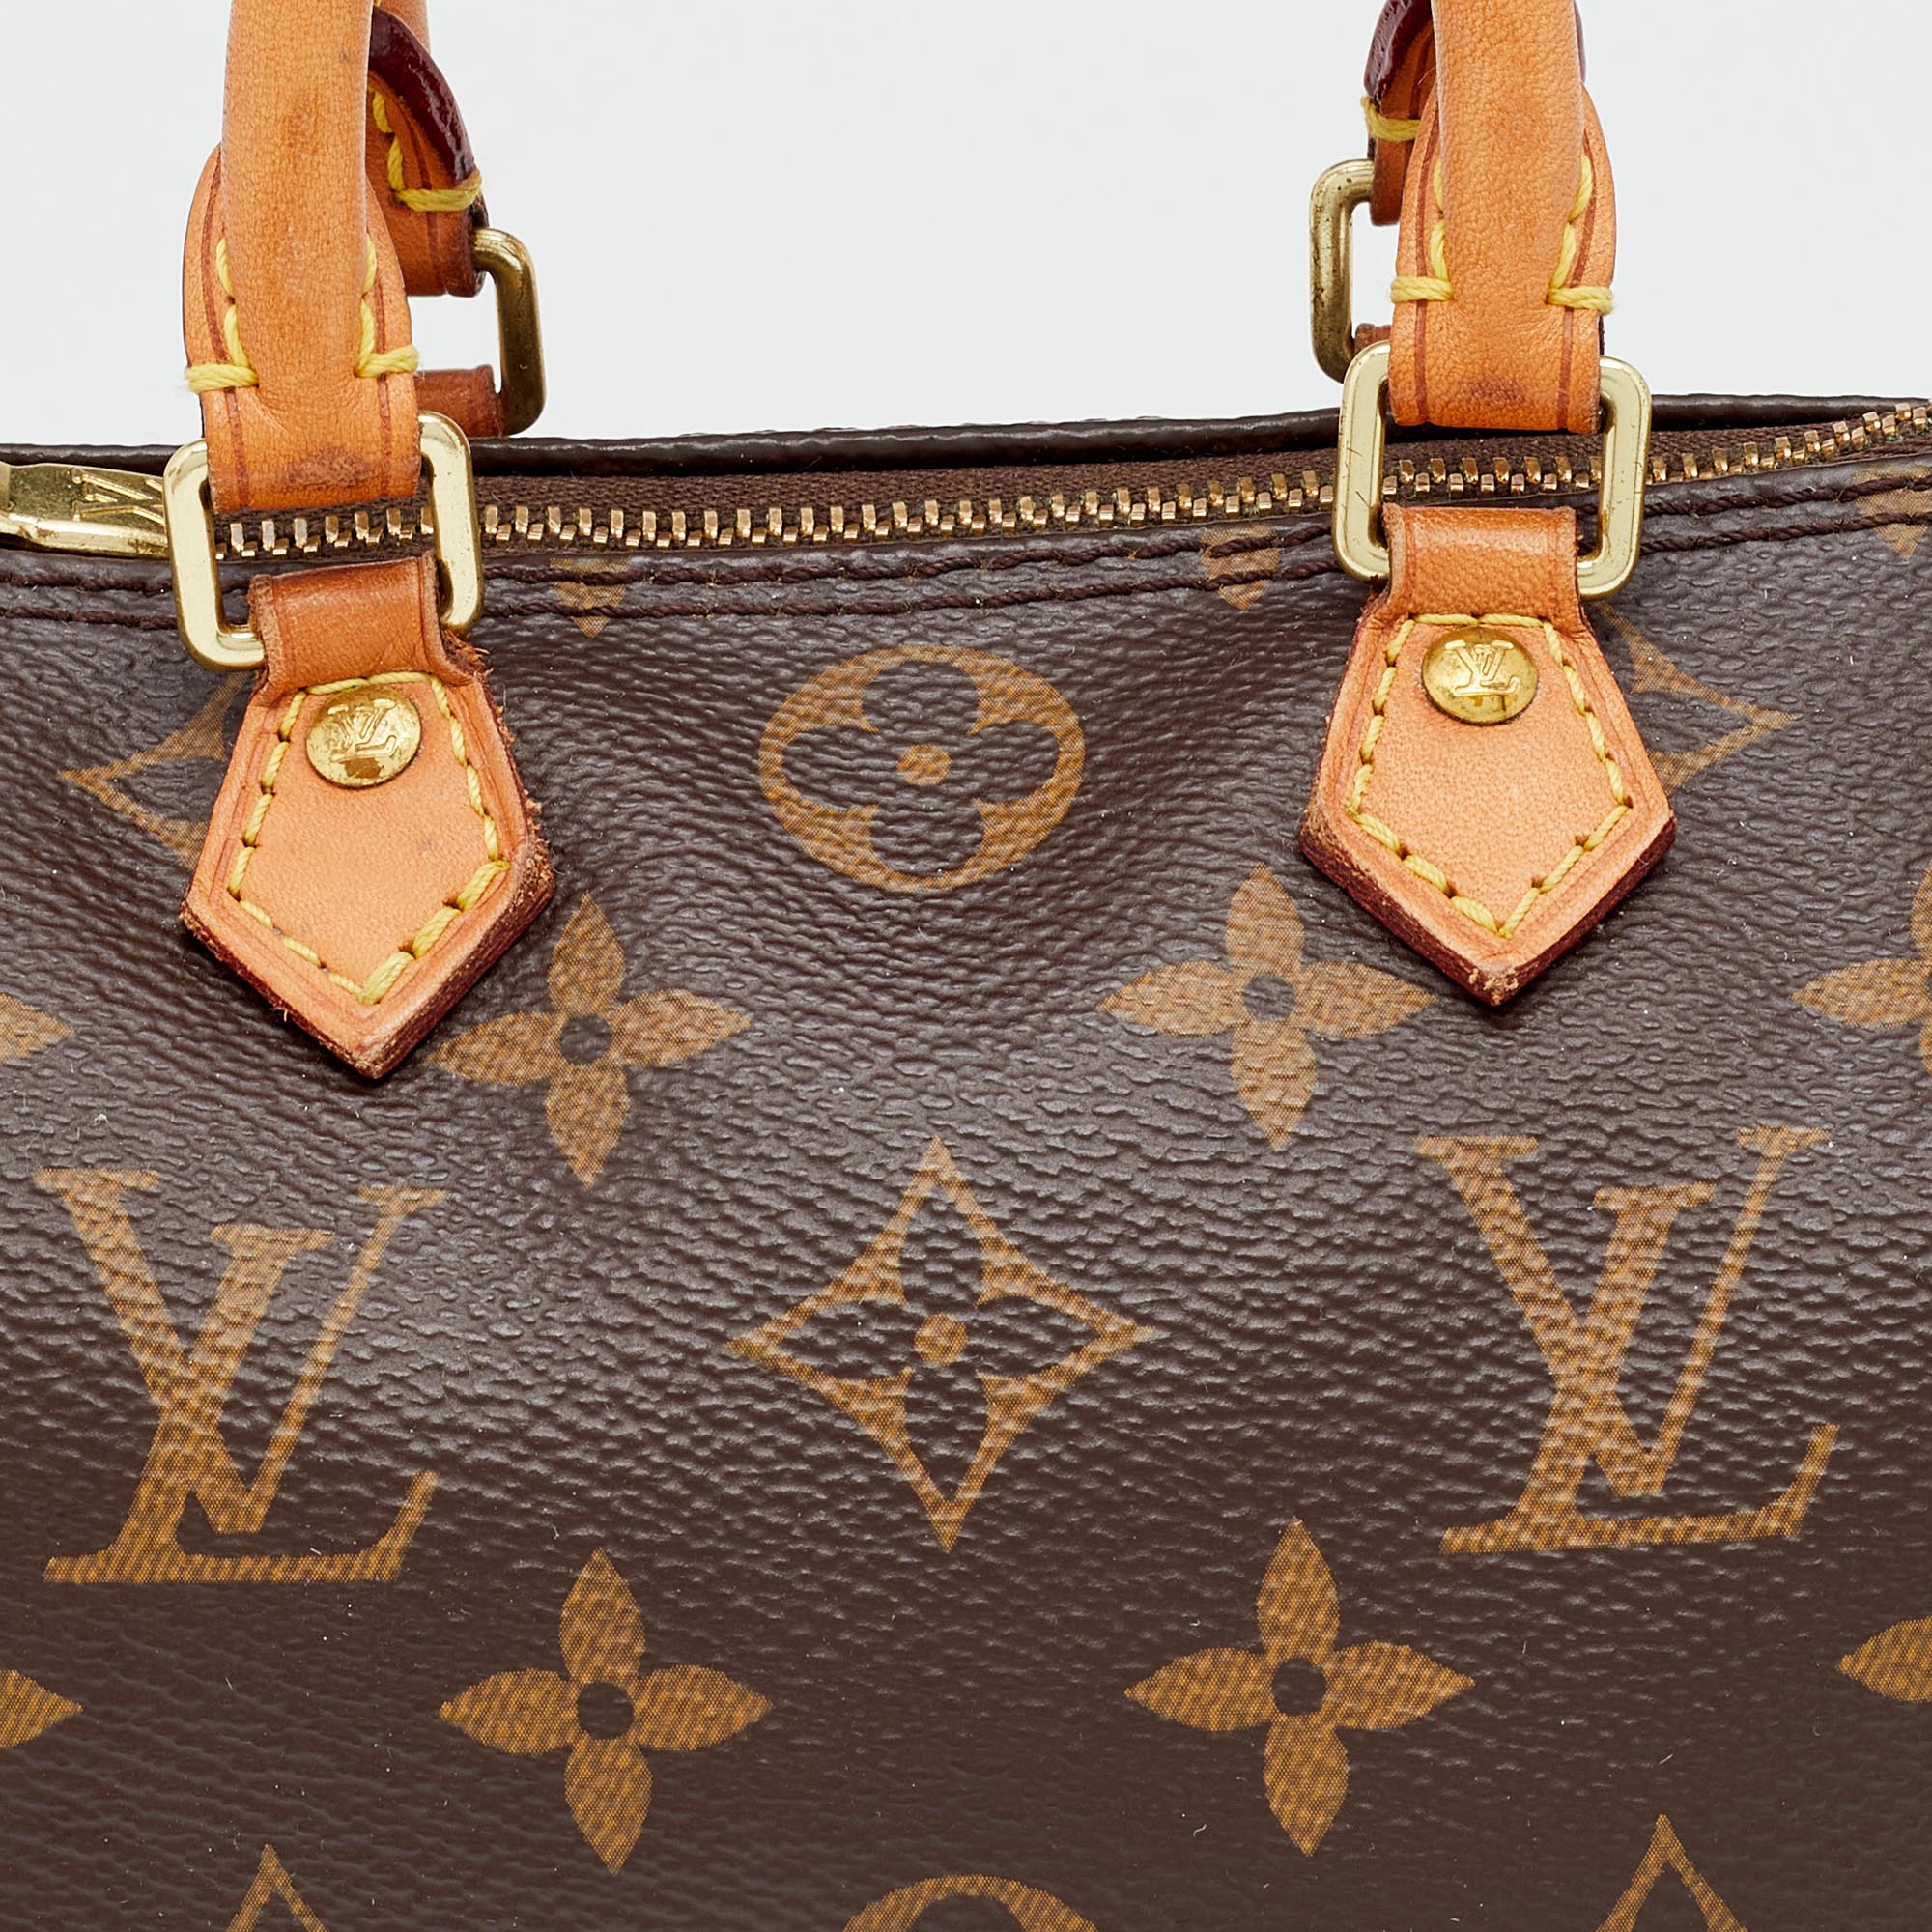 Louis VUITTON Speedy bag in Monogram canvas and natural…